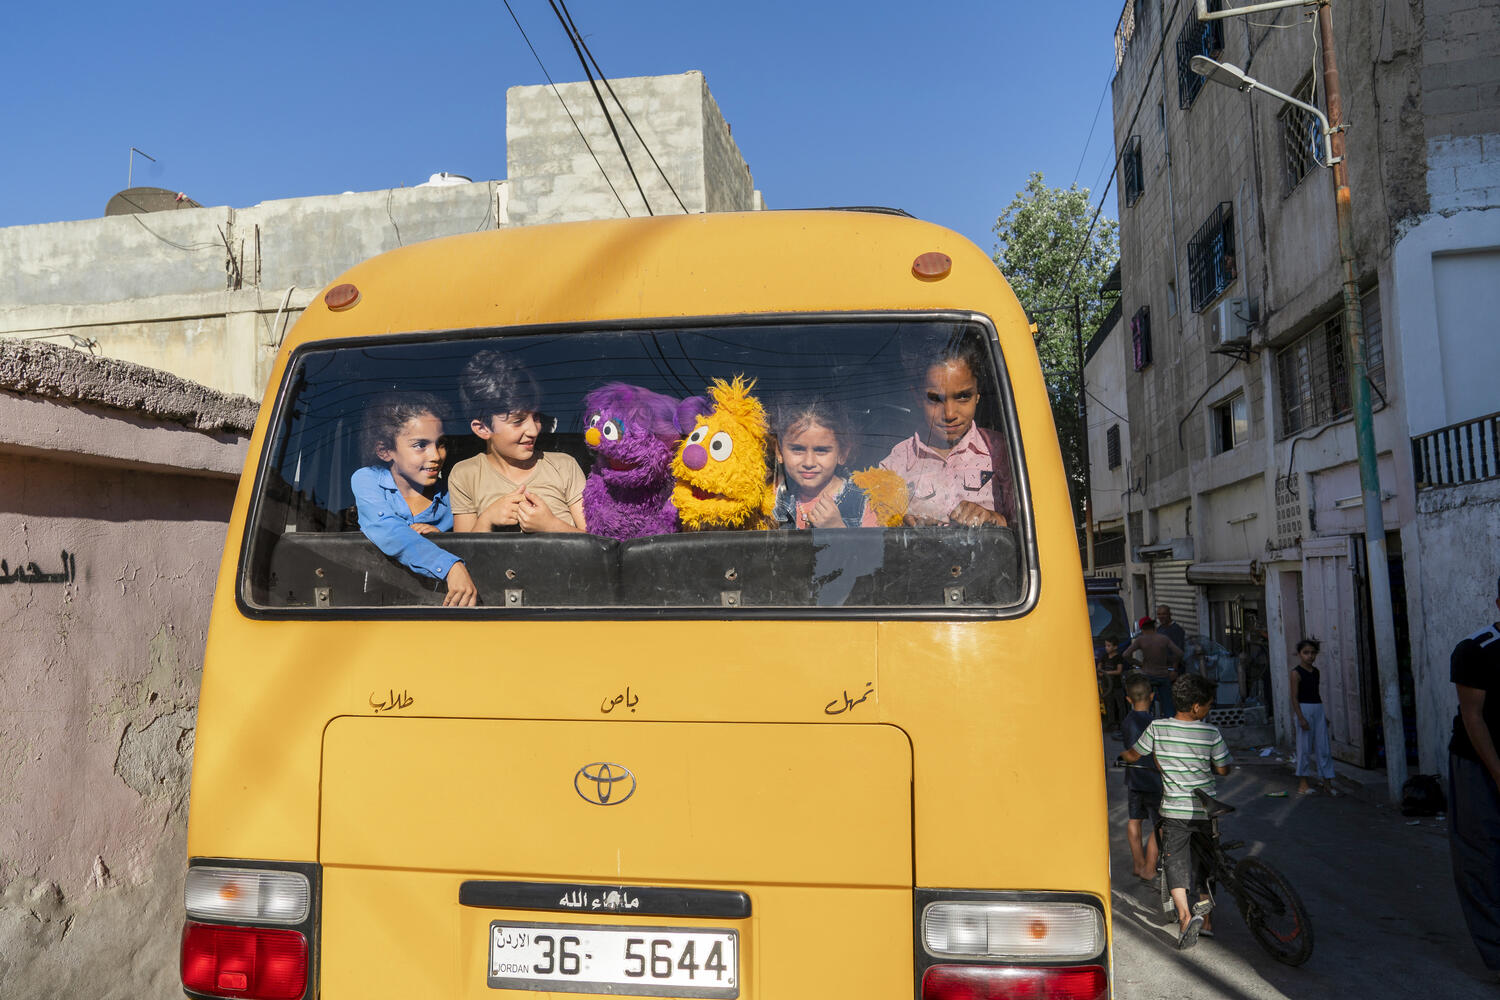 Basma and Jad from 'Ahlan Simsim' take the bus with new friends in Amman, Jordan